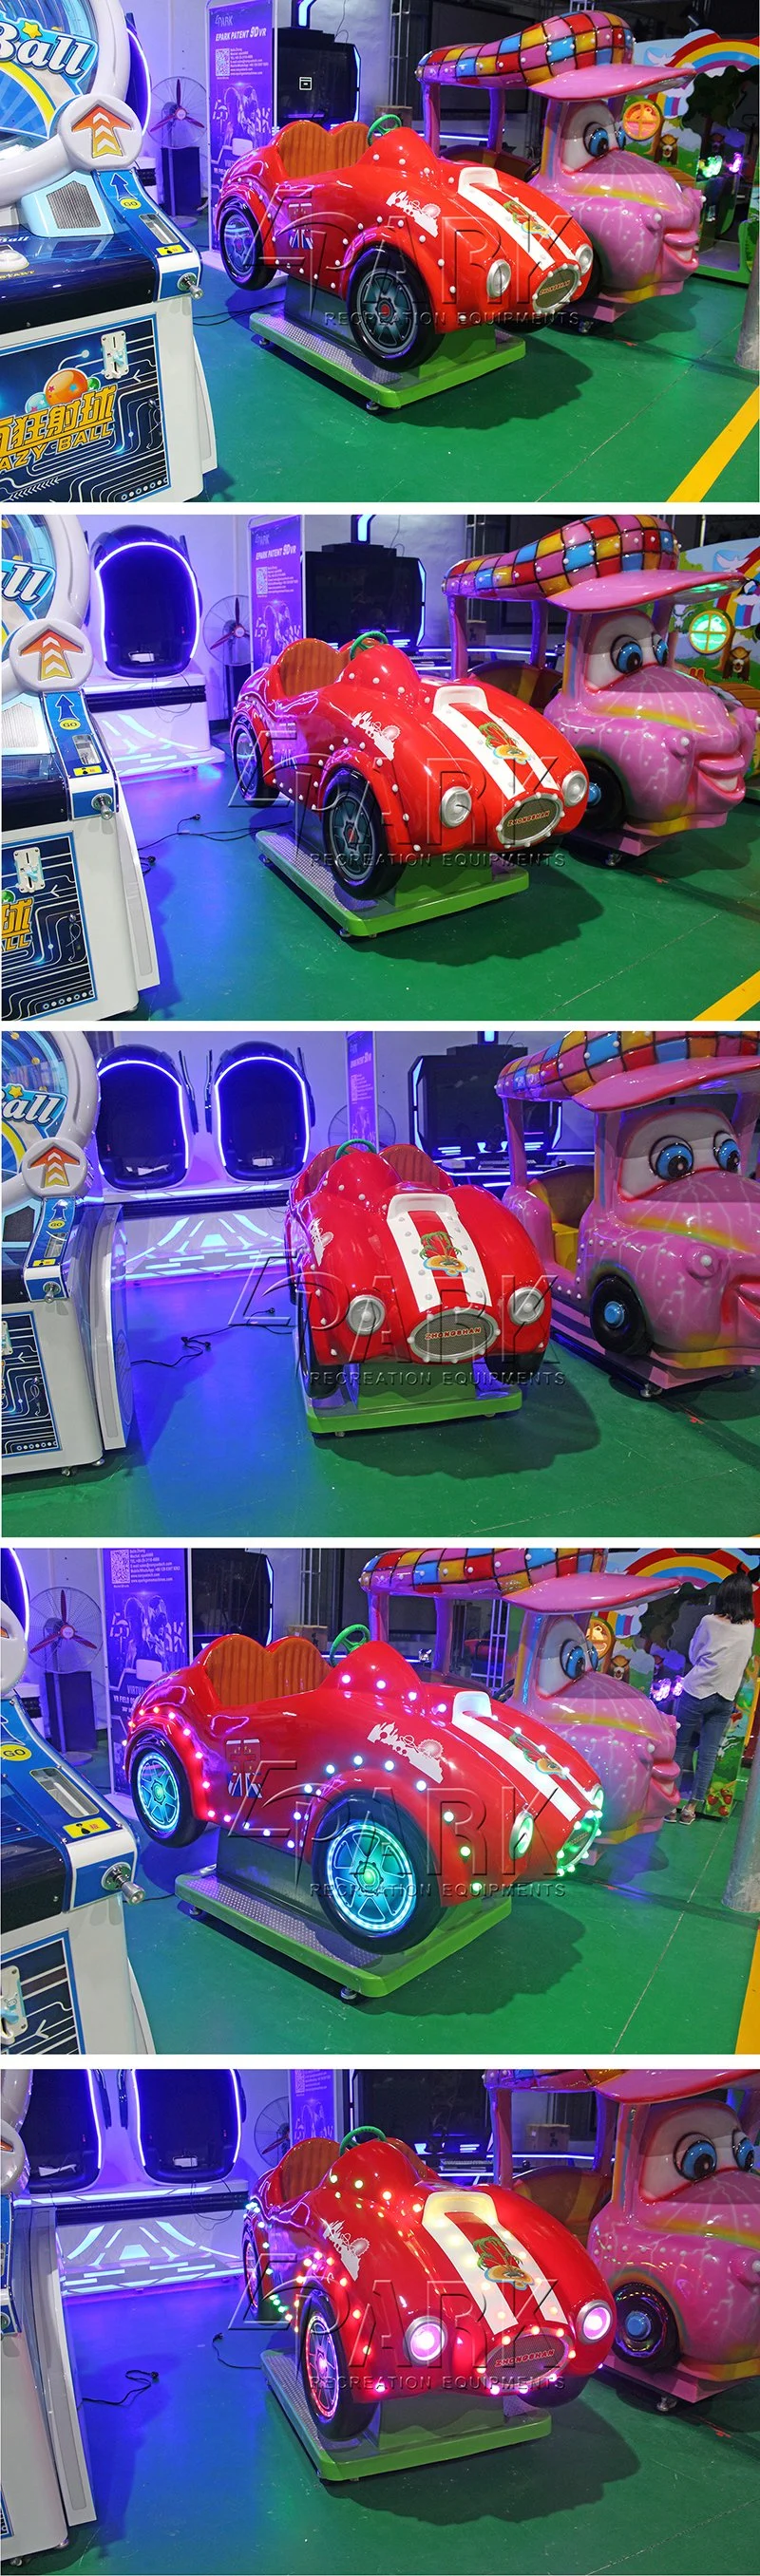 Indoor Playground Amusement Park Kids Ride Toy Machine Swing Car with Music Game Machine for Sale